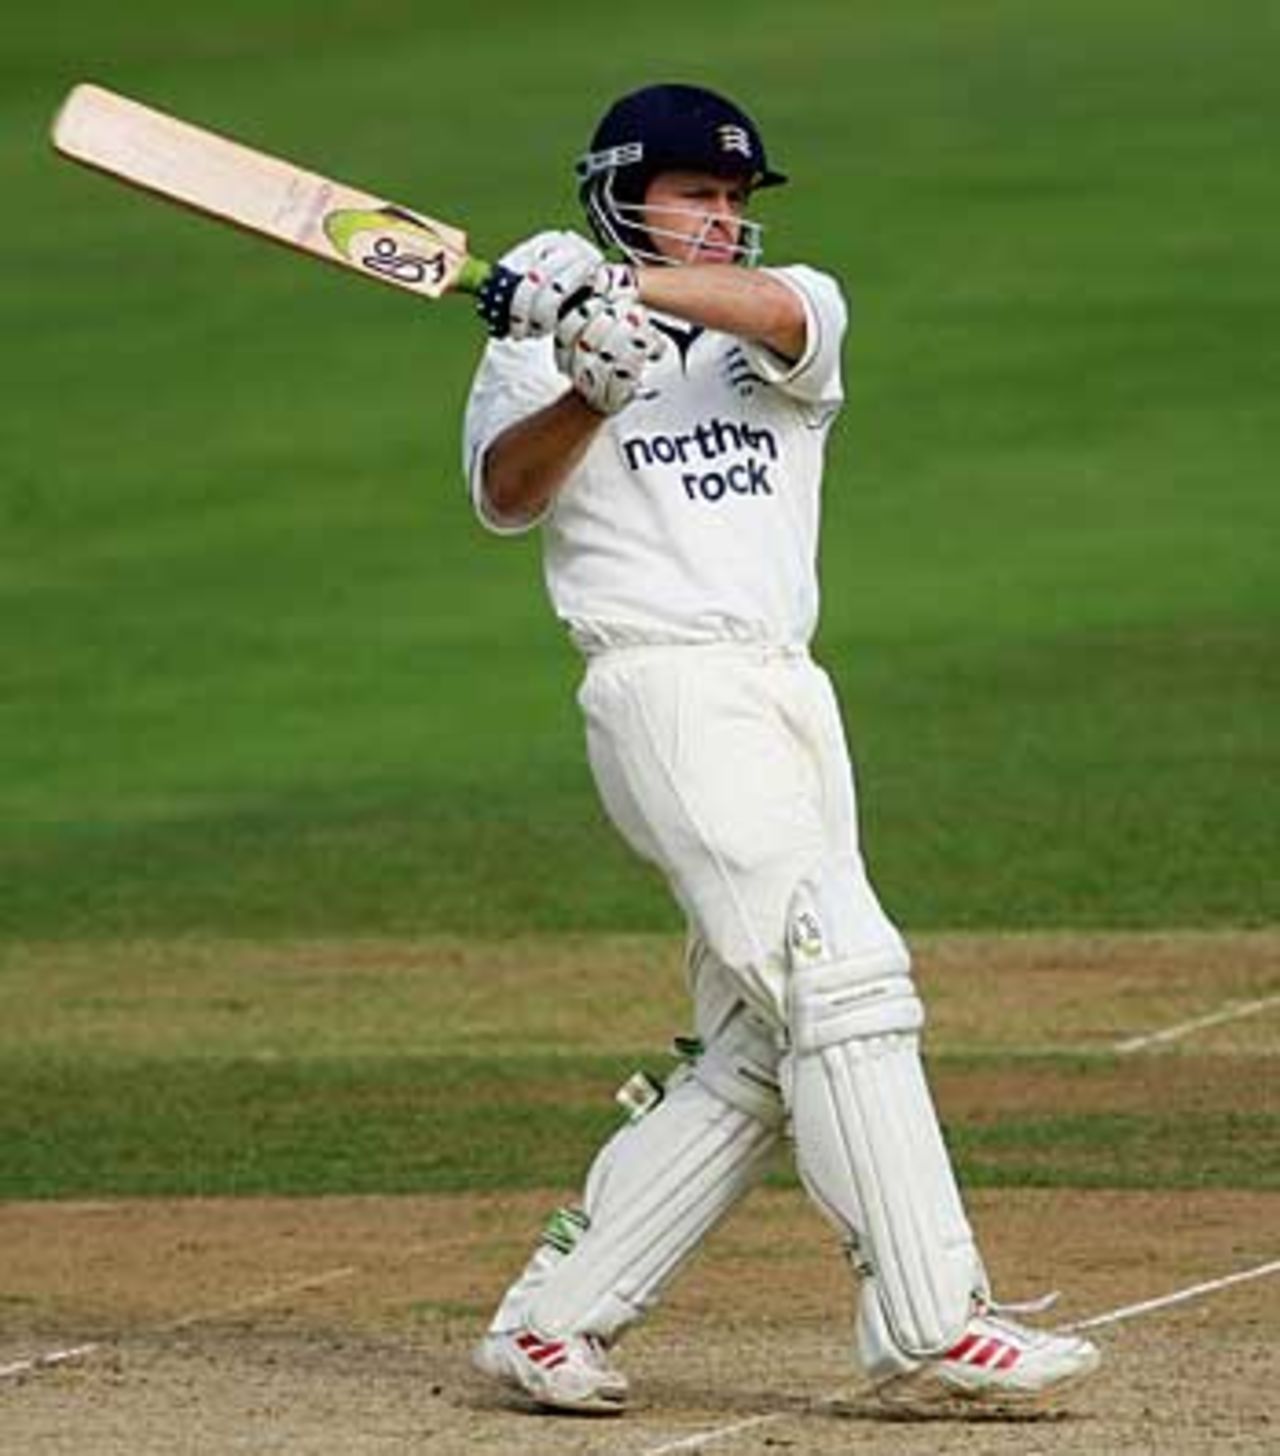 Ed Joyce stands tall as he pulls to the leg side, Surrey v Middlesex, The Oval, September 21, 2005